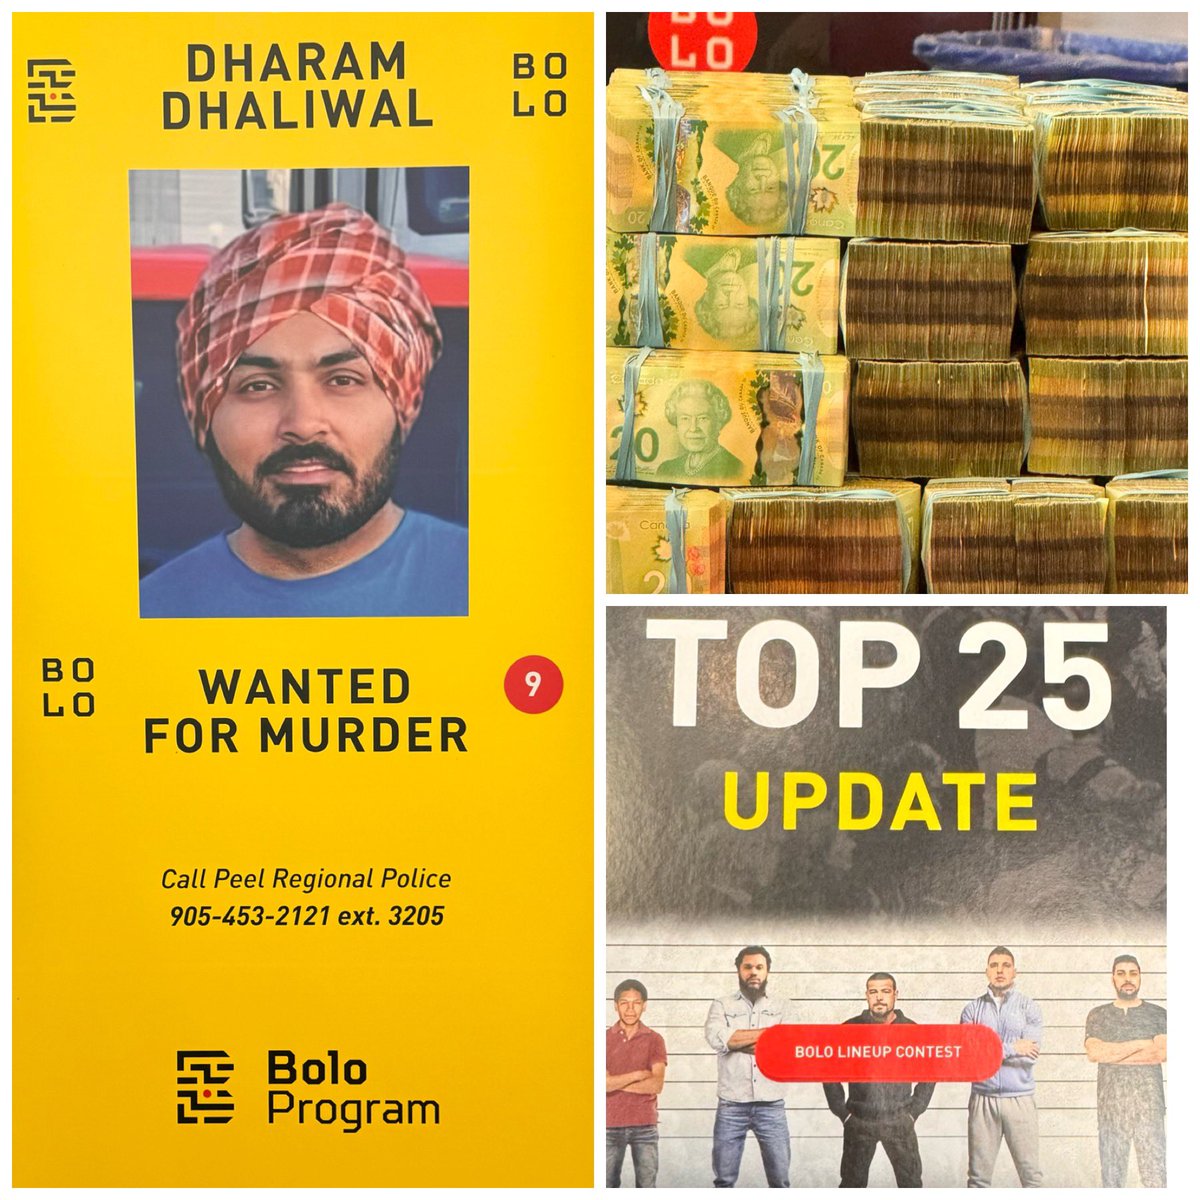 Today the @BoloProgram offered 1M dollars for information leading to the arrest of Canada’s 25 most dangerous/wanted criminals. DHALIWAL is wanted for murder. It is the only incident of femicide among the 25 cases. Be on the lookout for him! @PeelCrimeStopp